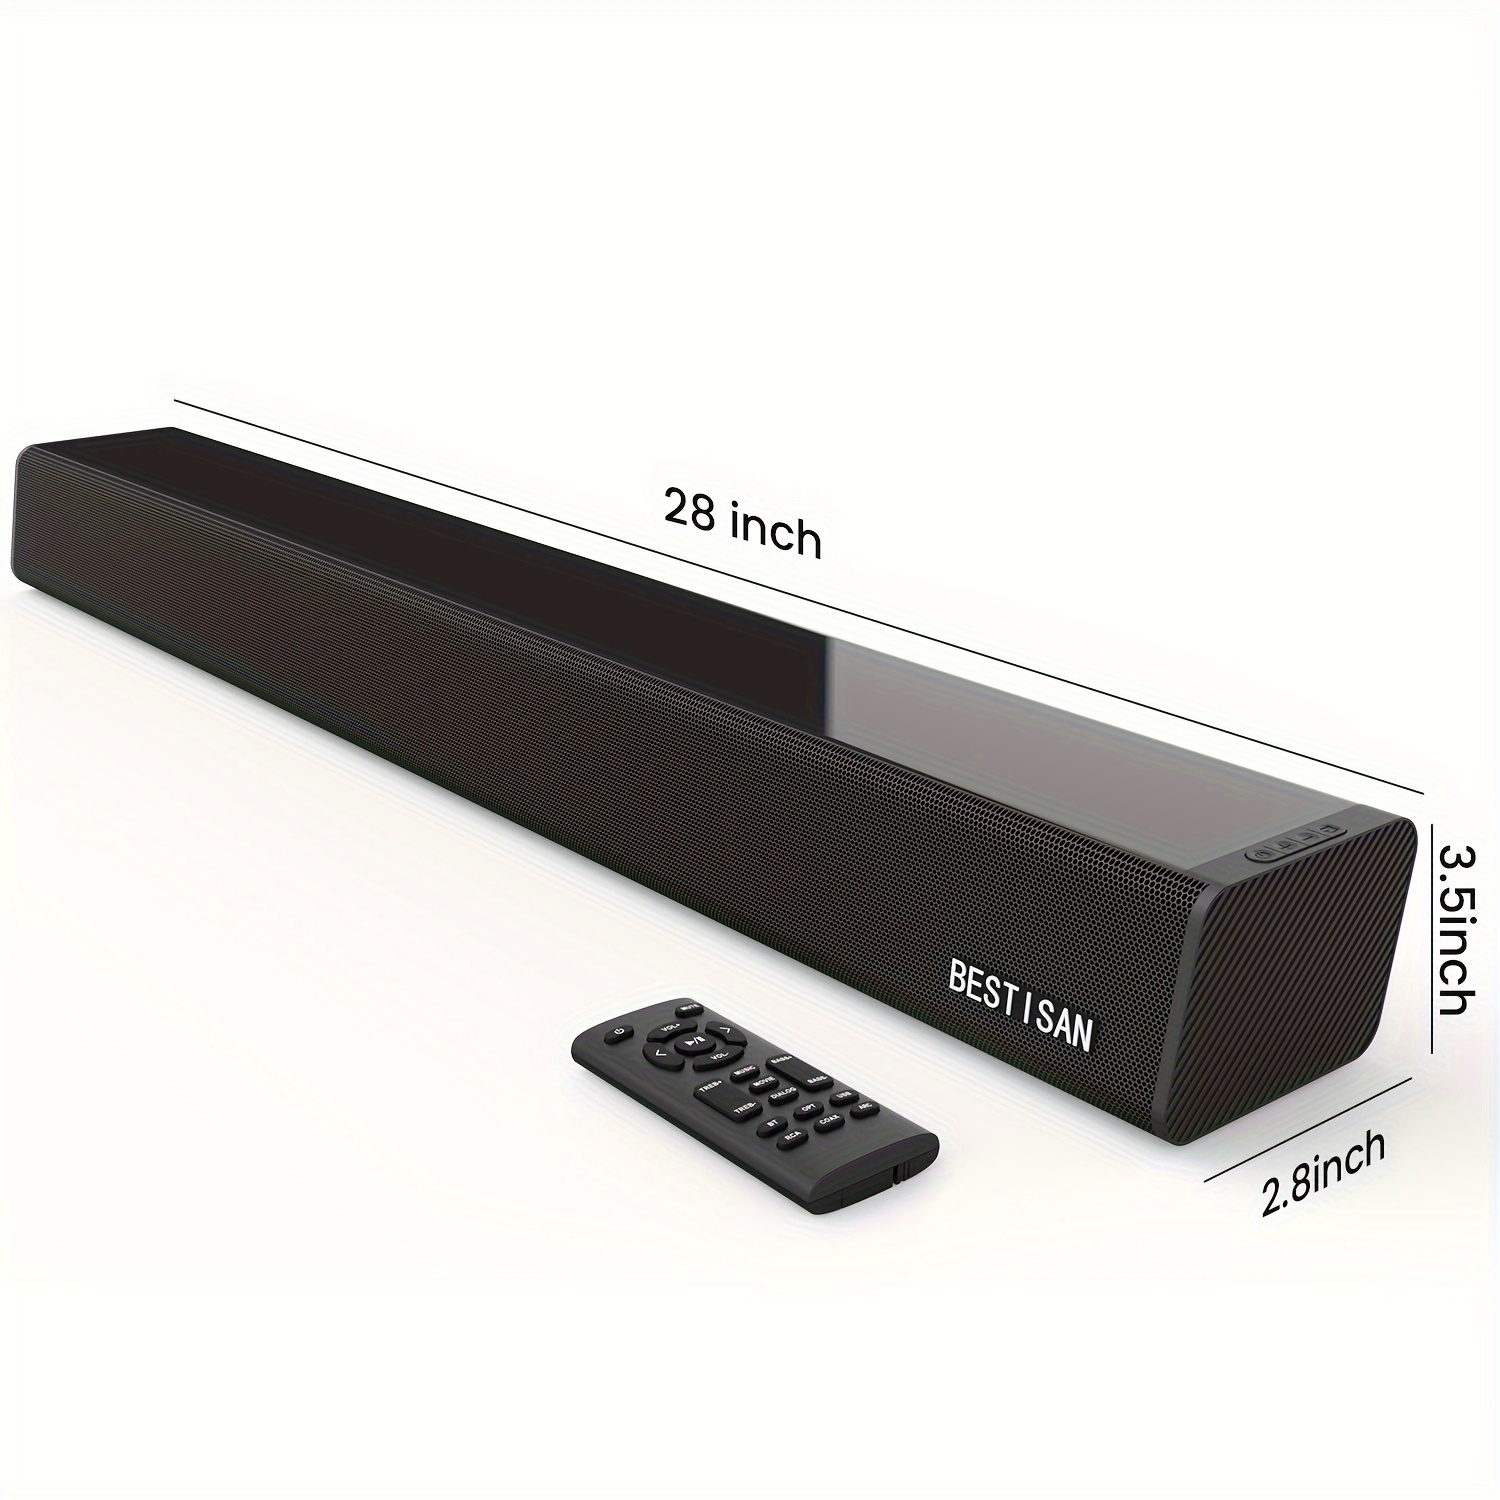 

Bestisan Soundbar 28-inch 80w With Arc, Optical, Coaxial, Usb, Aux And Bt 5.0 Connections, 4 Speakers, 3 Eqs, 110db Surround Sound Bar Home Theater Audio For Tv.